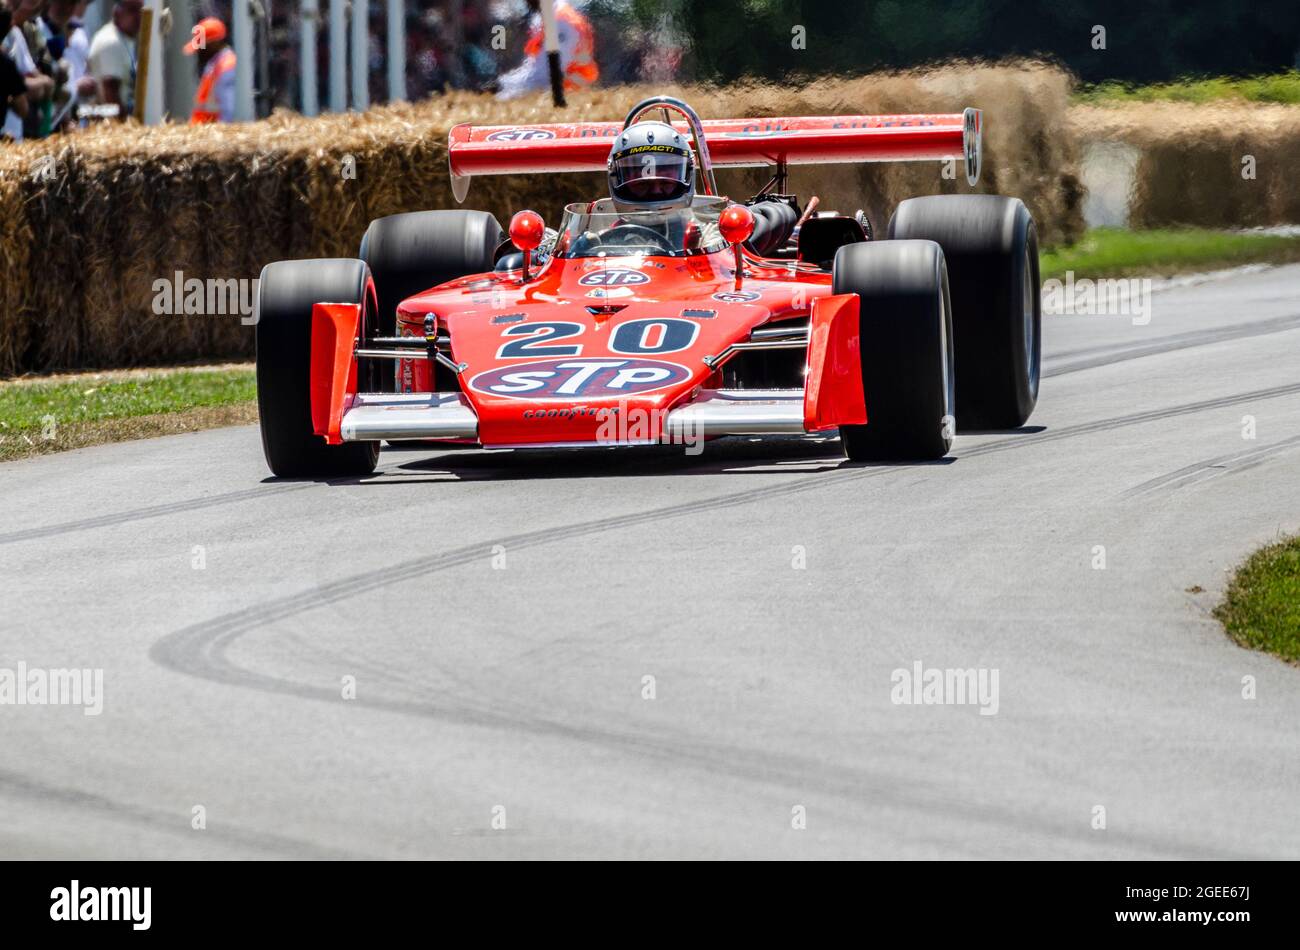 Eagle 7200 Offenhauser STP Indy 500 historic racing car driving up the hill climb track at the Goodwood Festival of Speed motor racing event Stock Photo